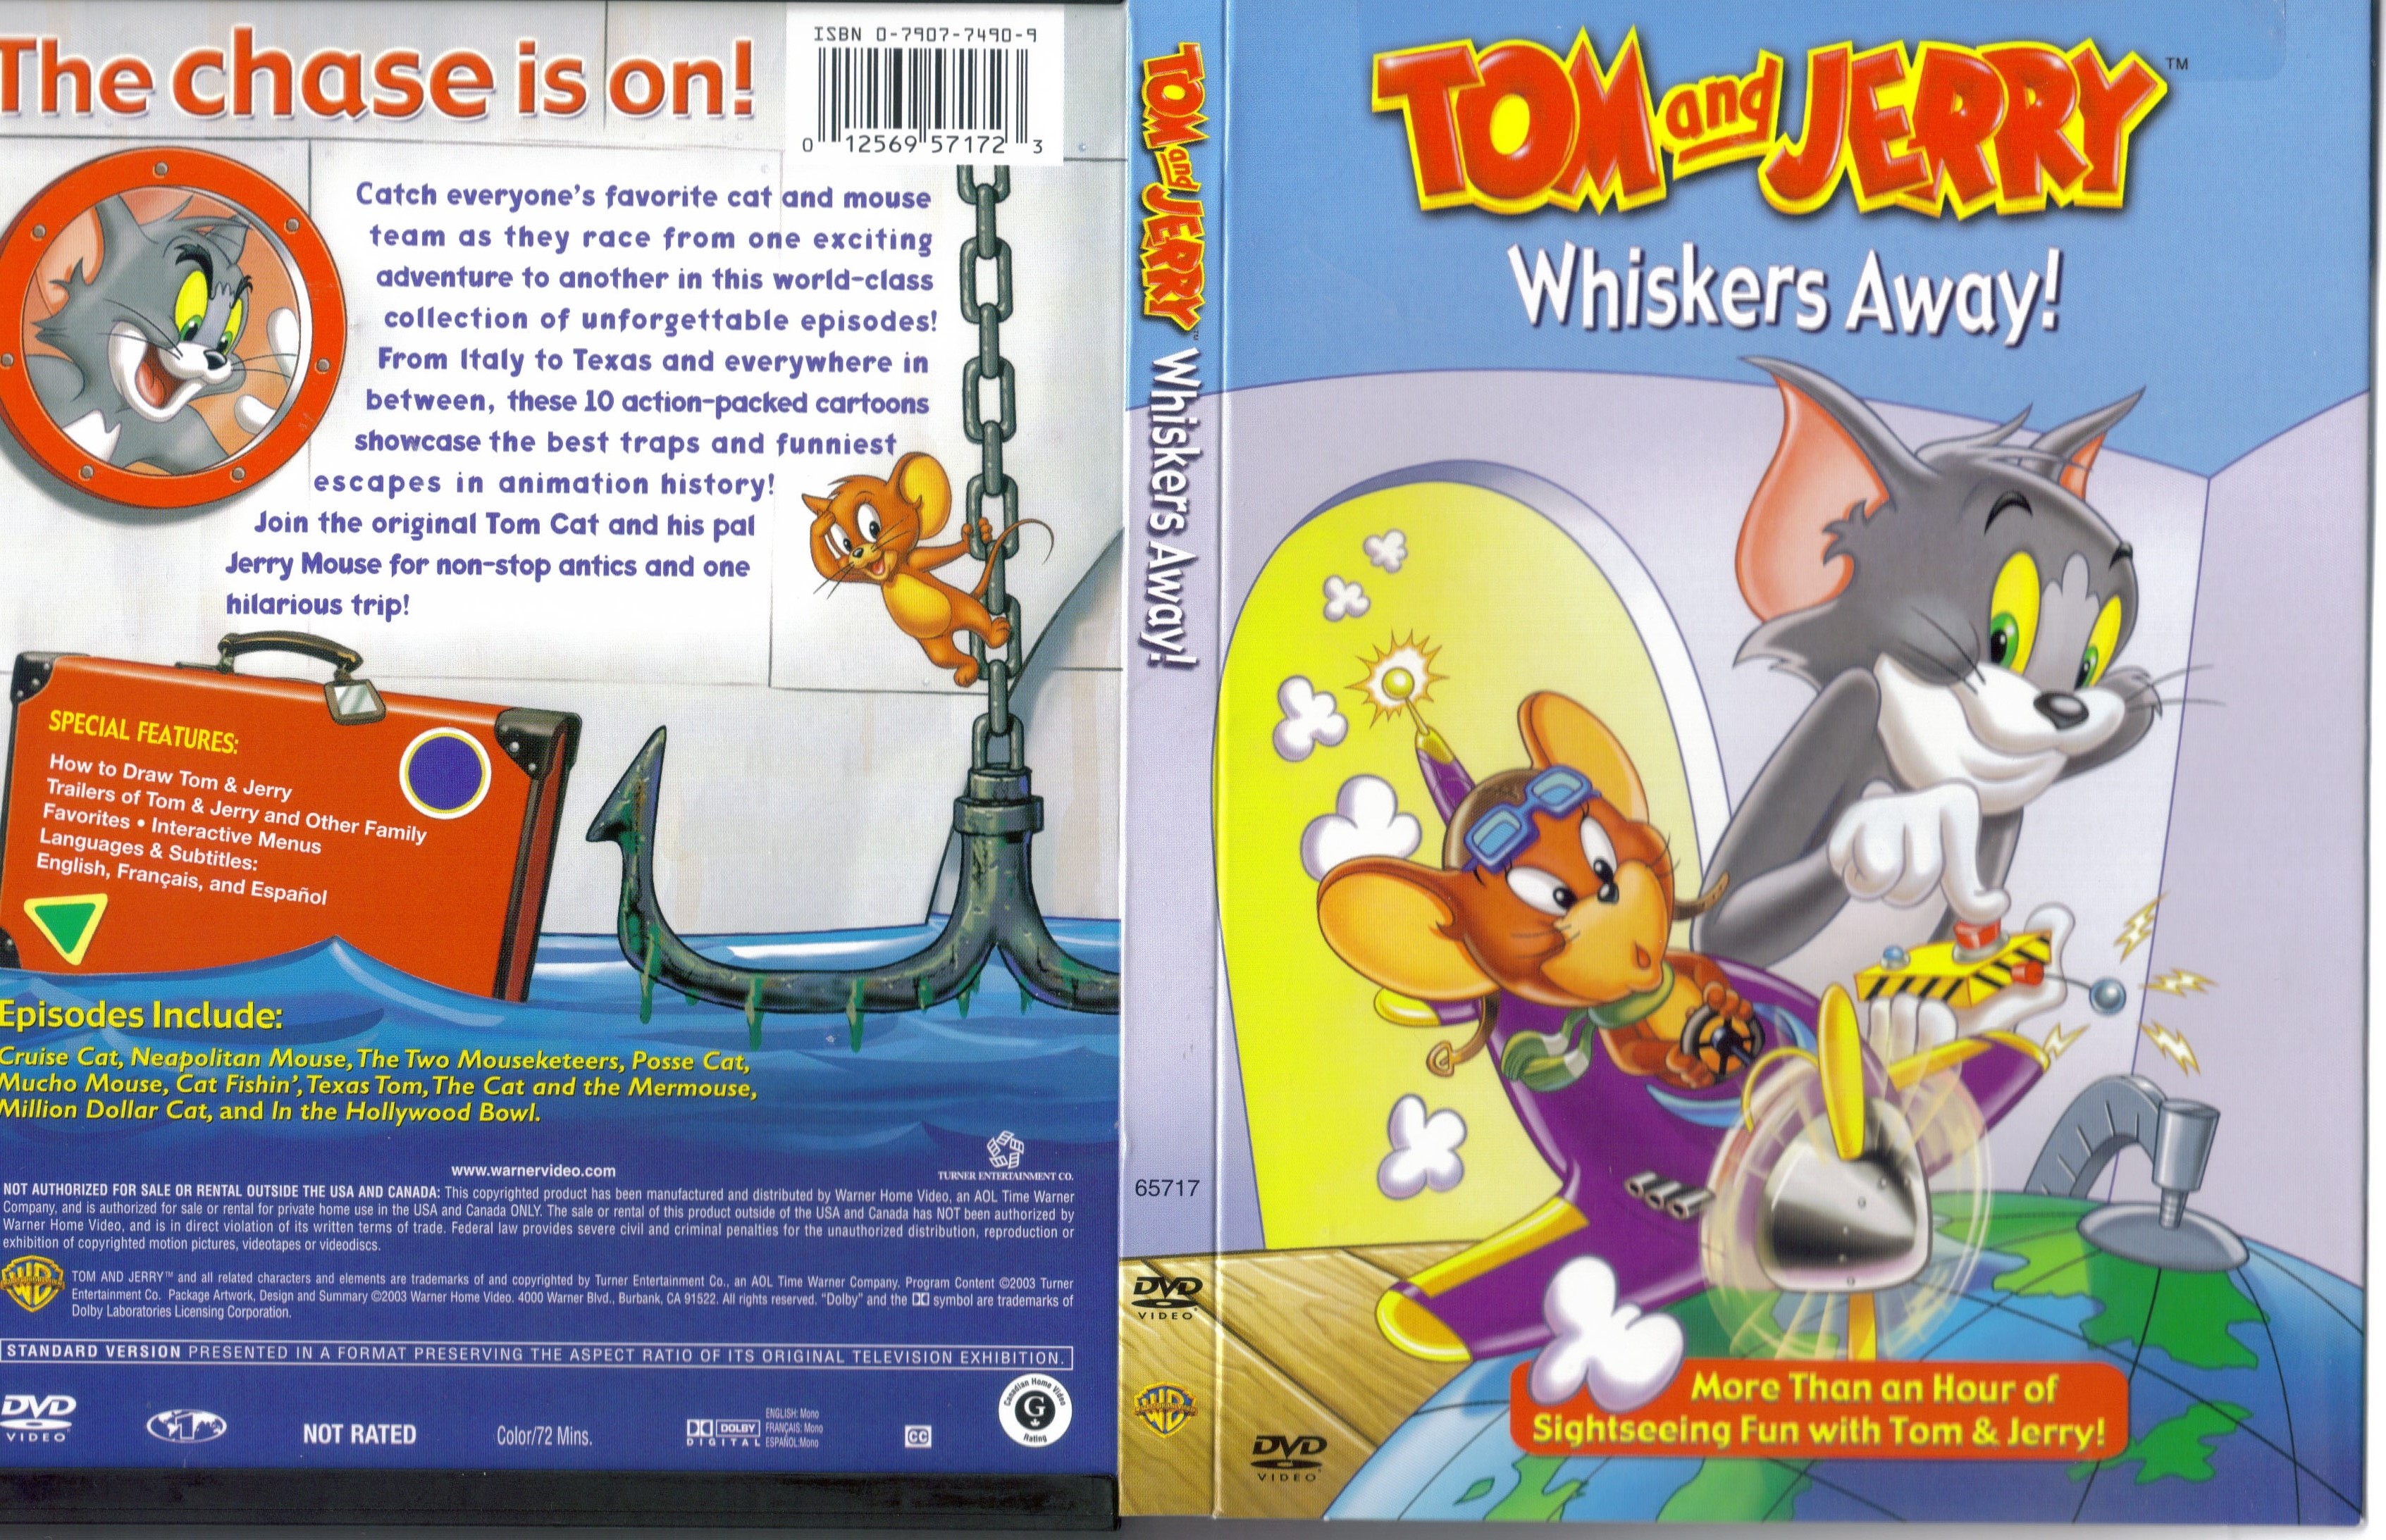 Jaquette DVD Tom & Jerry Whiskers away (Canadienne)